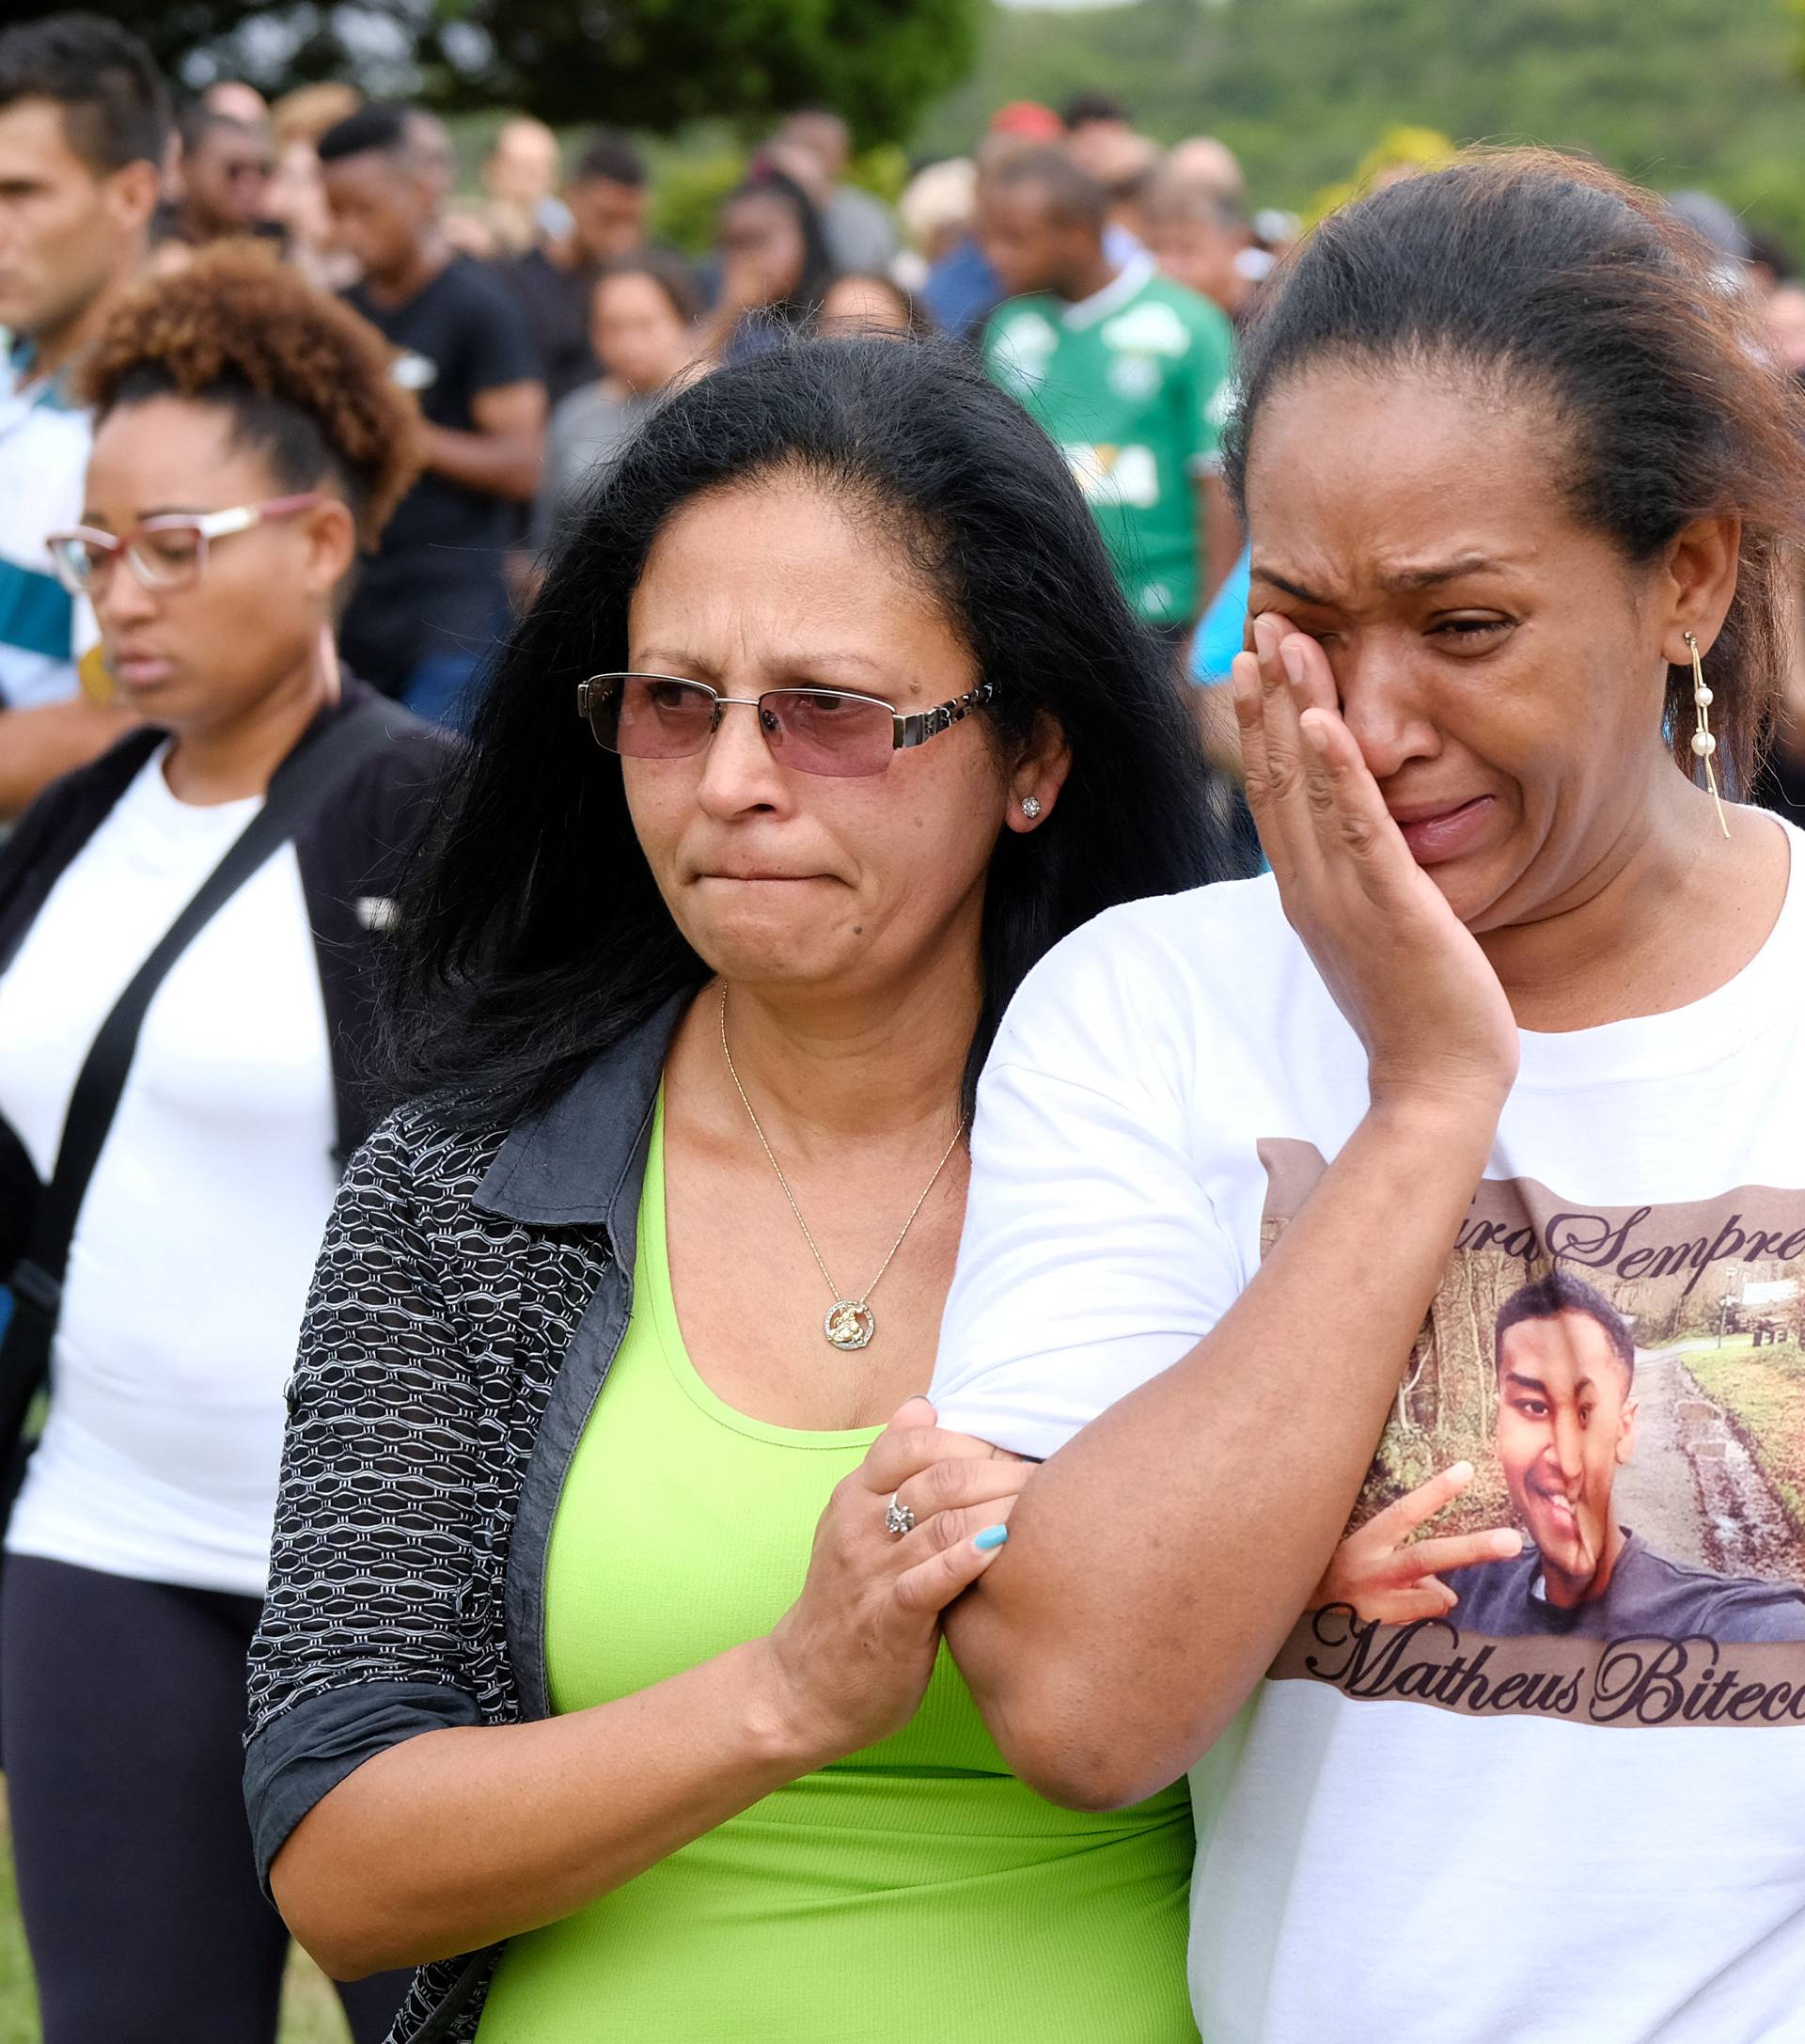 Fabiane Bitencourt, mother of Chapecoense soccer club player Matheus Biteco, who died in the plane crash in Colombia, reacts during his burial in Porto Alegre